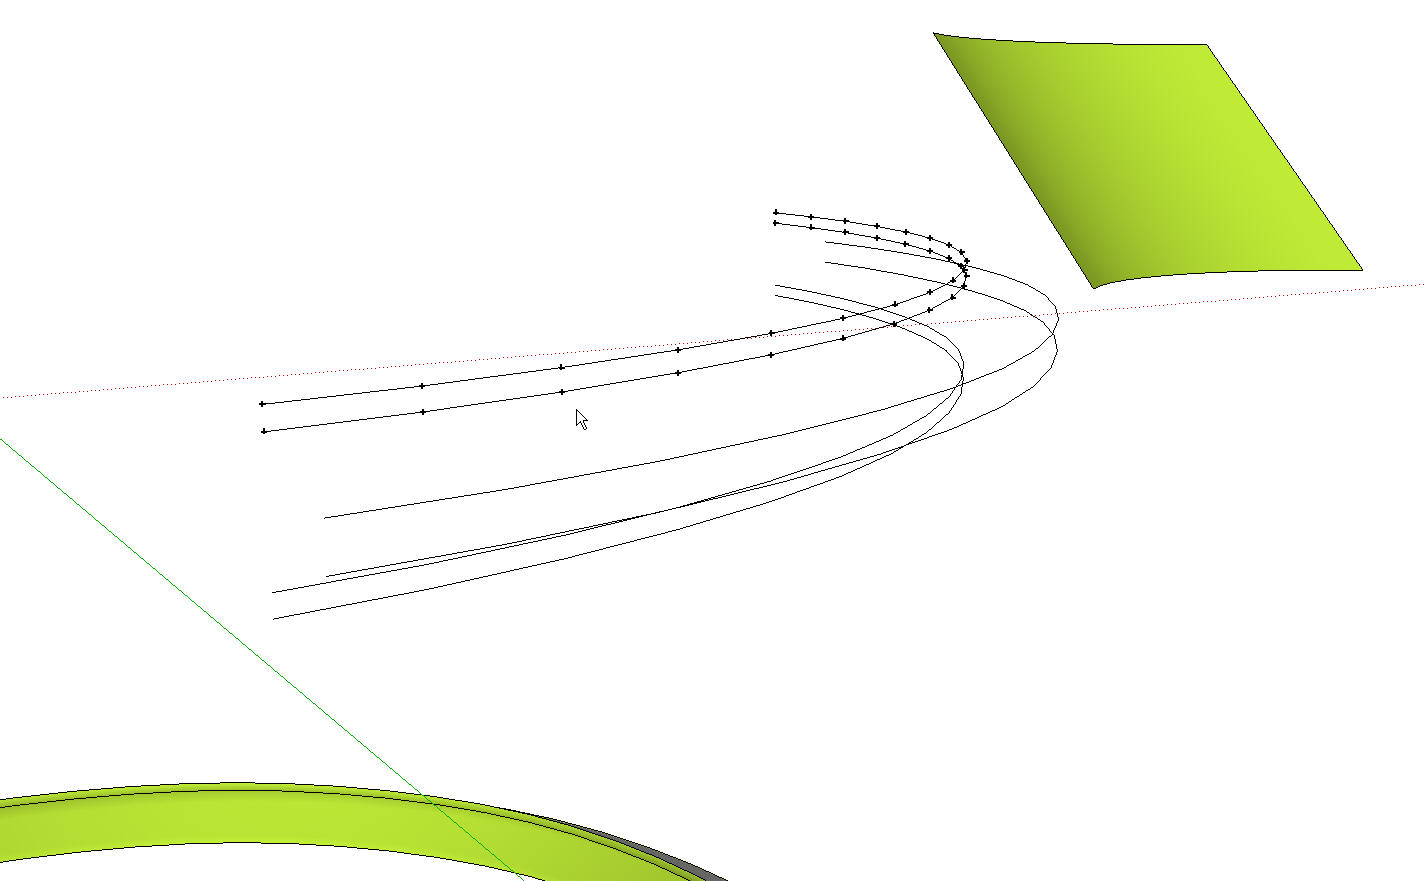 All six curves selected. One segment chosen in dialog box